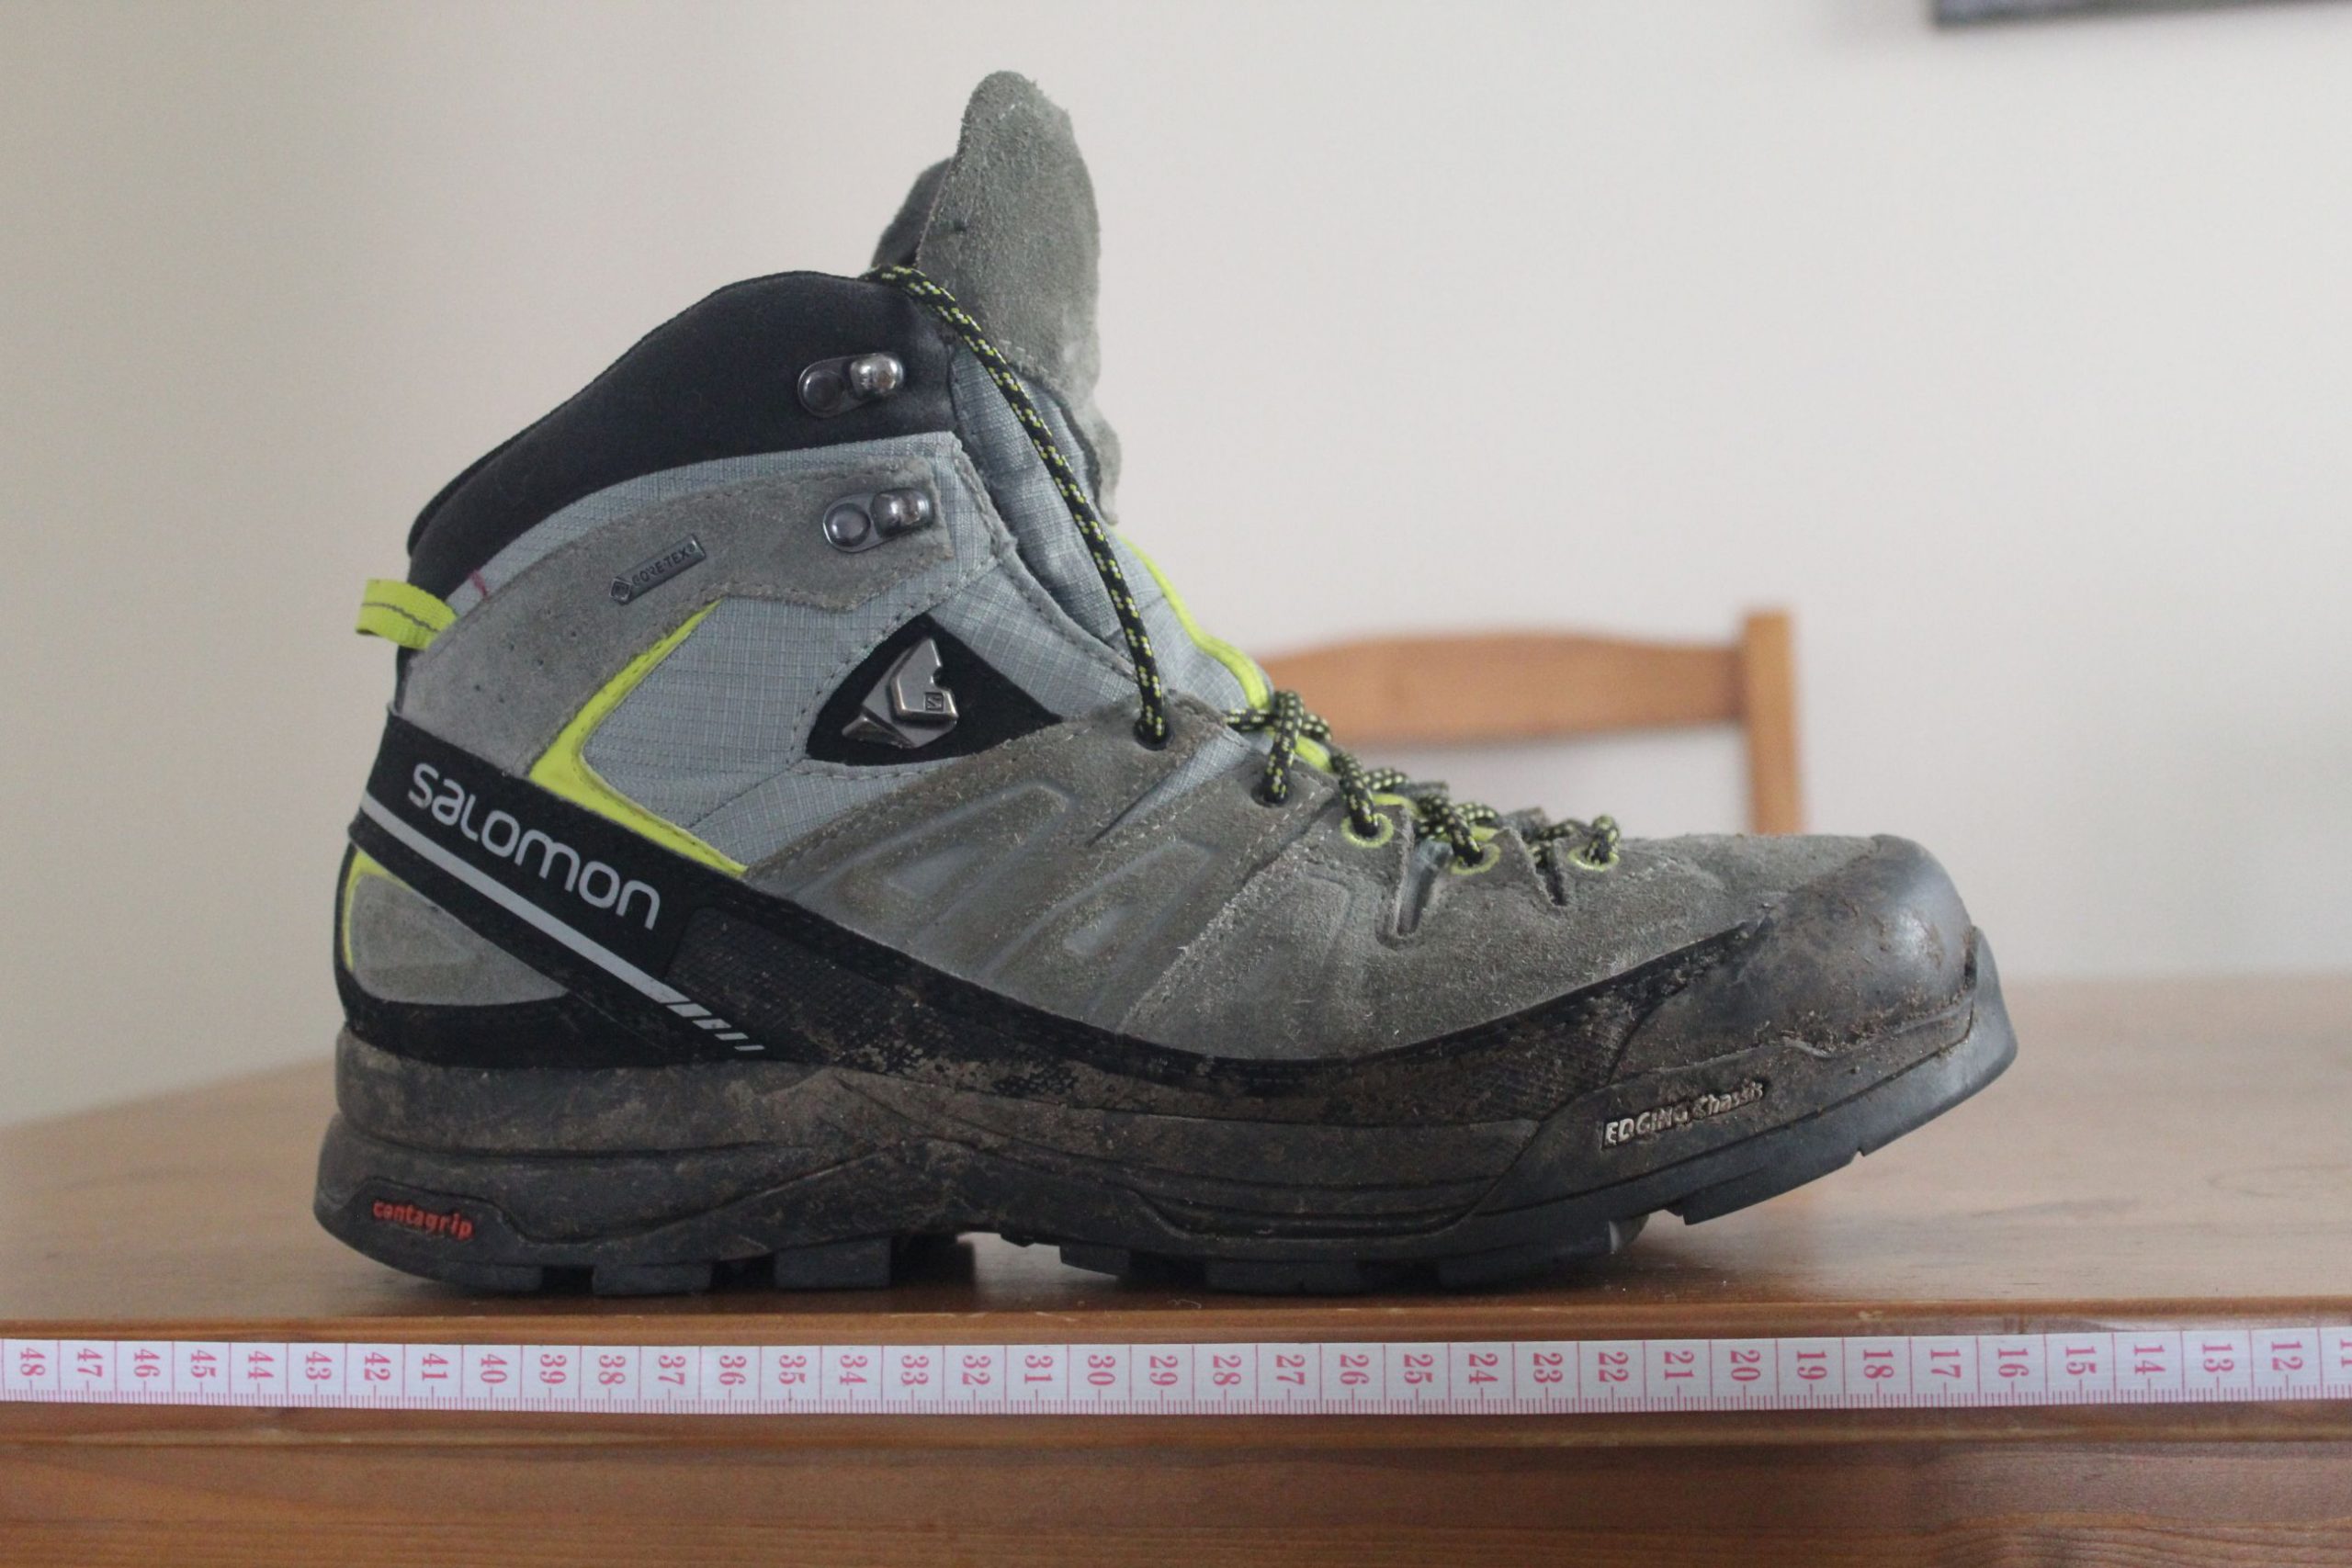 A hiking boot with a measuring tape below.